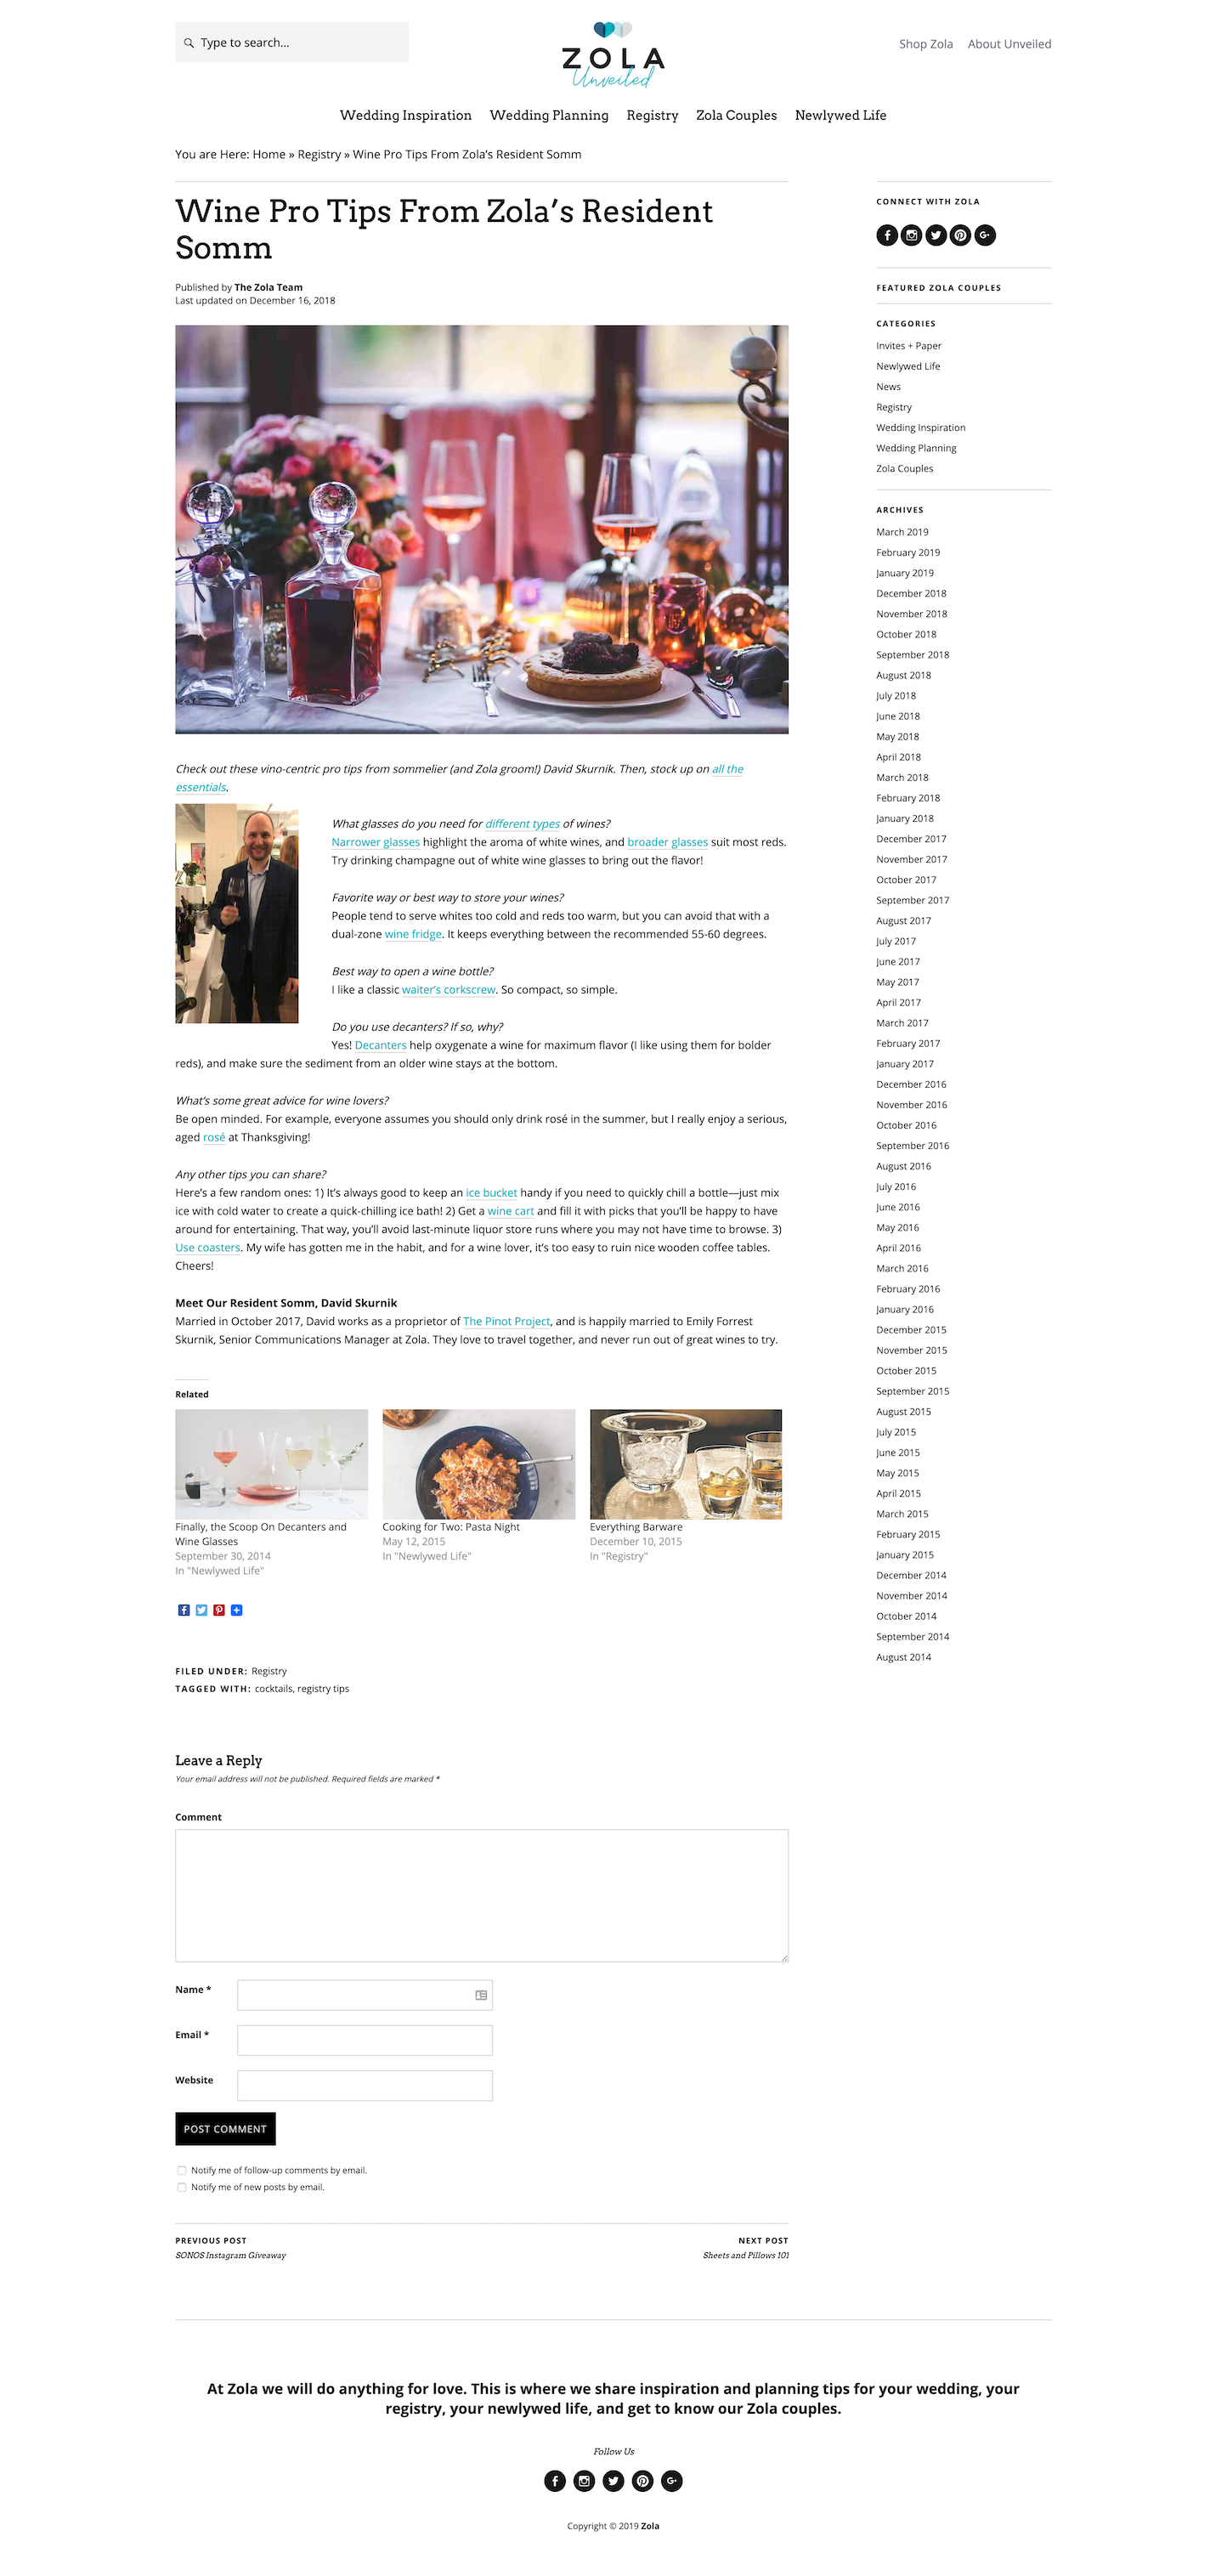 Screenshot of the Blog - Article page from the Zola website.